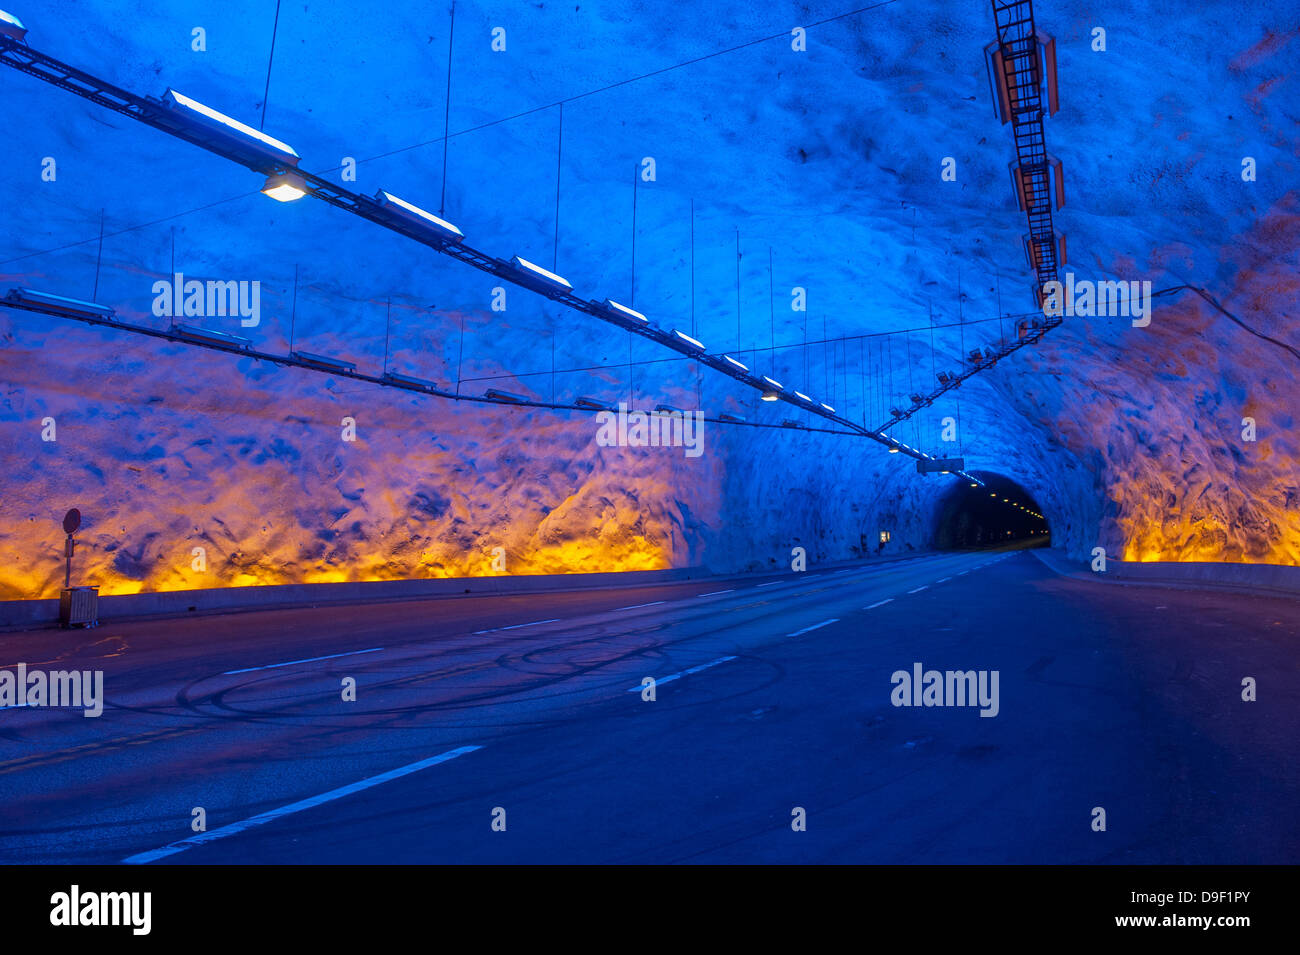 Laerdal tunnel, Norway, the longest road tunnel in the world Stock Photo